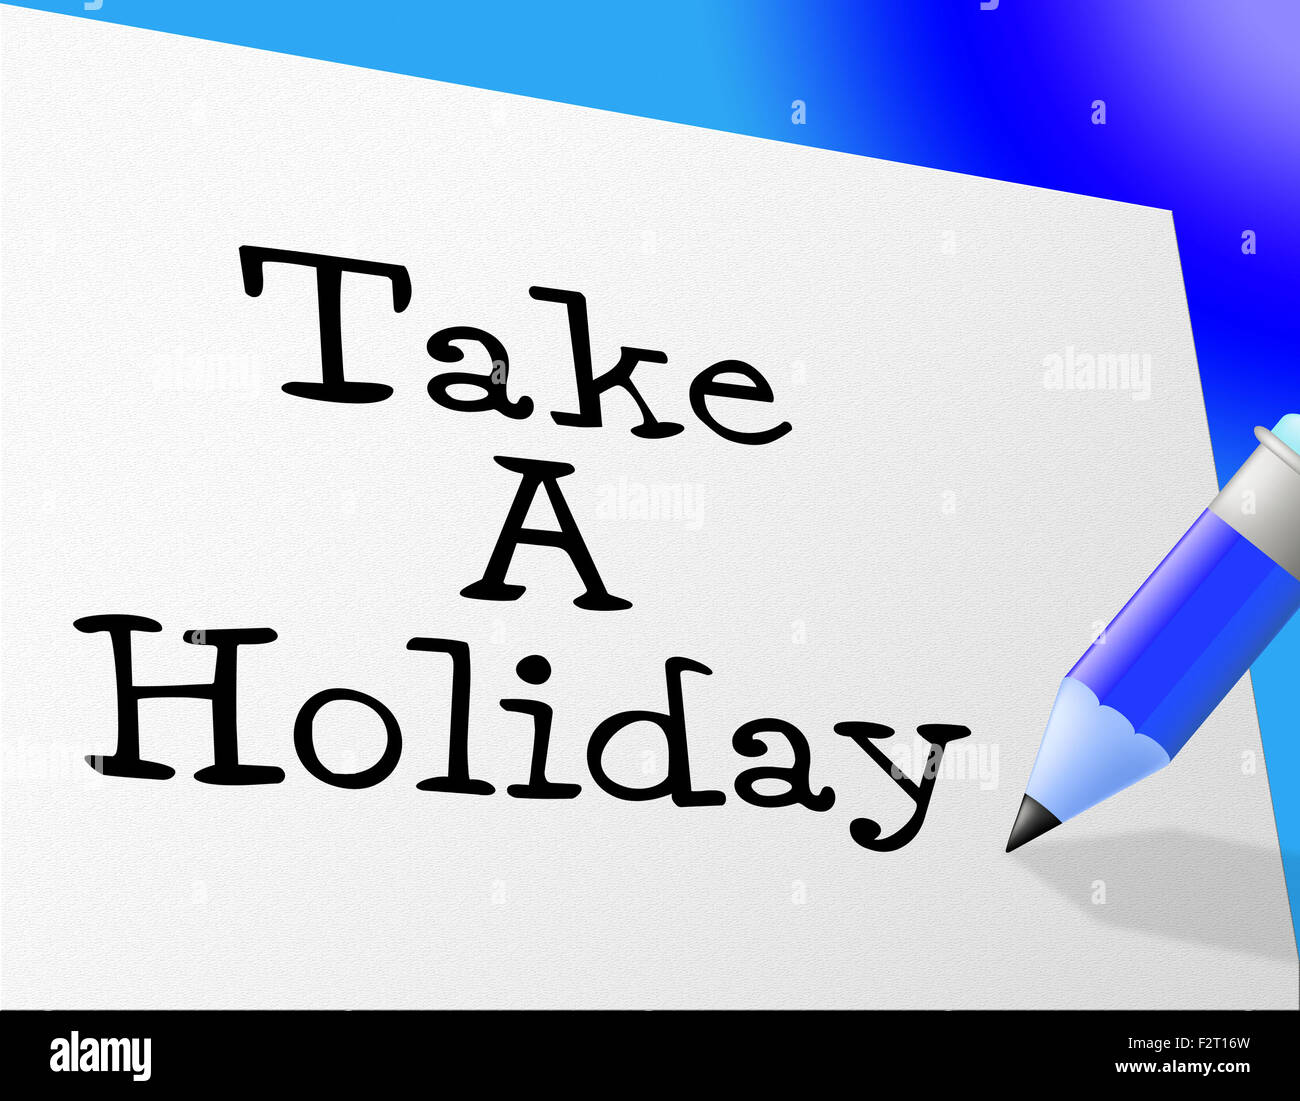 Take A Holiday Indicating Go On Leave And Time Off Stock Photo